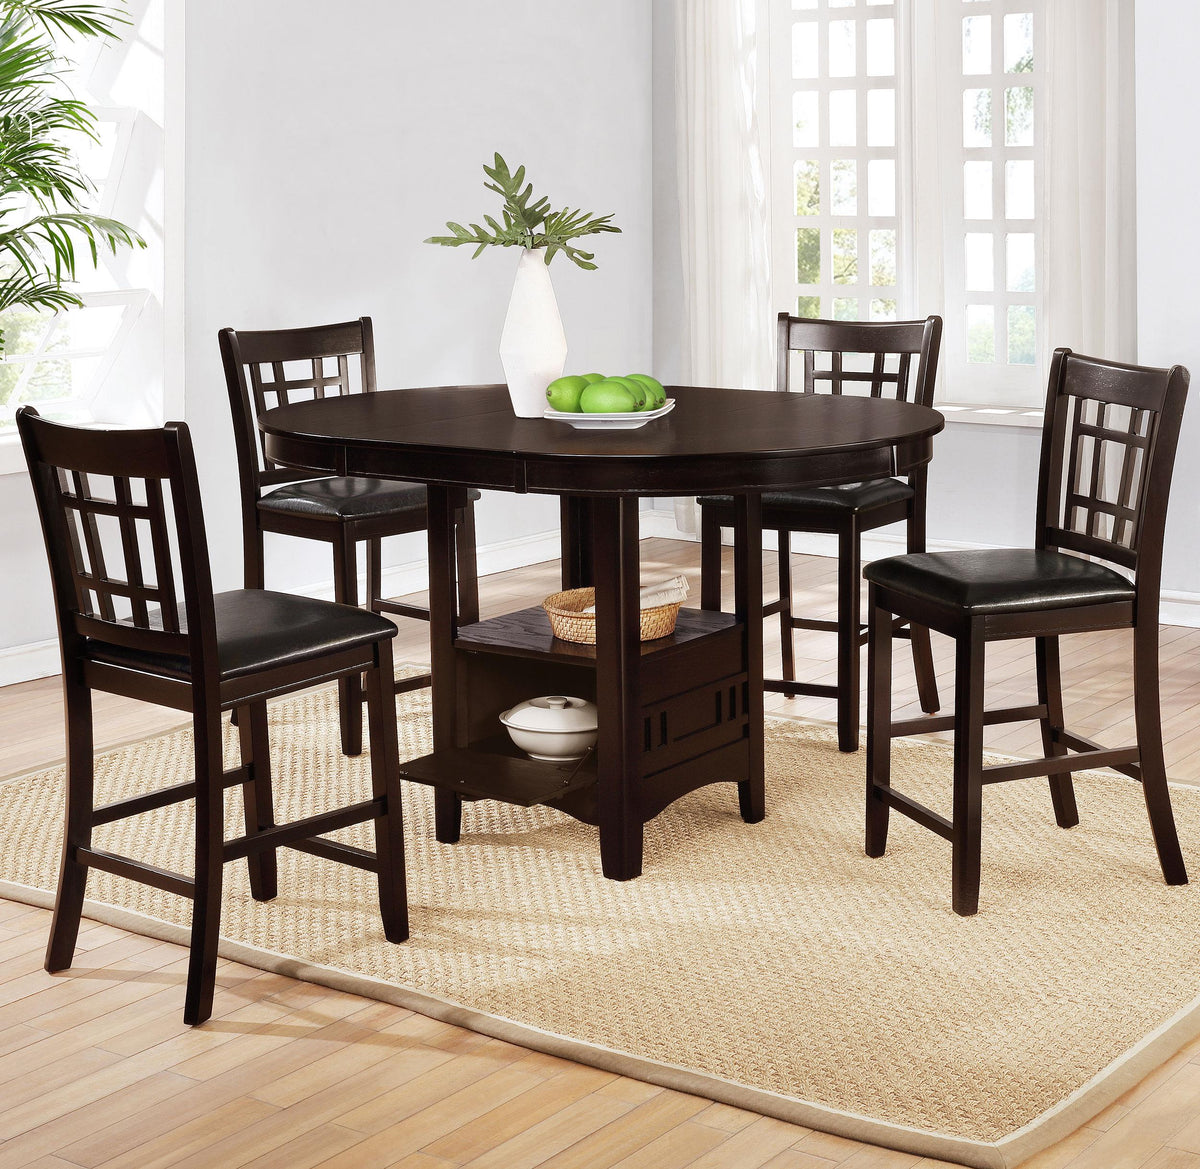 Lavon 5-piece Counter Height Dining Room Set Espresso and Black Lavon 5-piece Counter Height Dining Room Set Espresso and Black Half Price Furniture